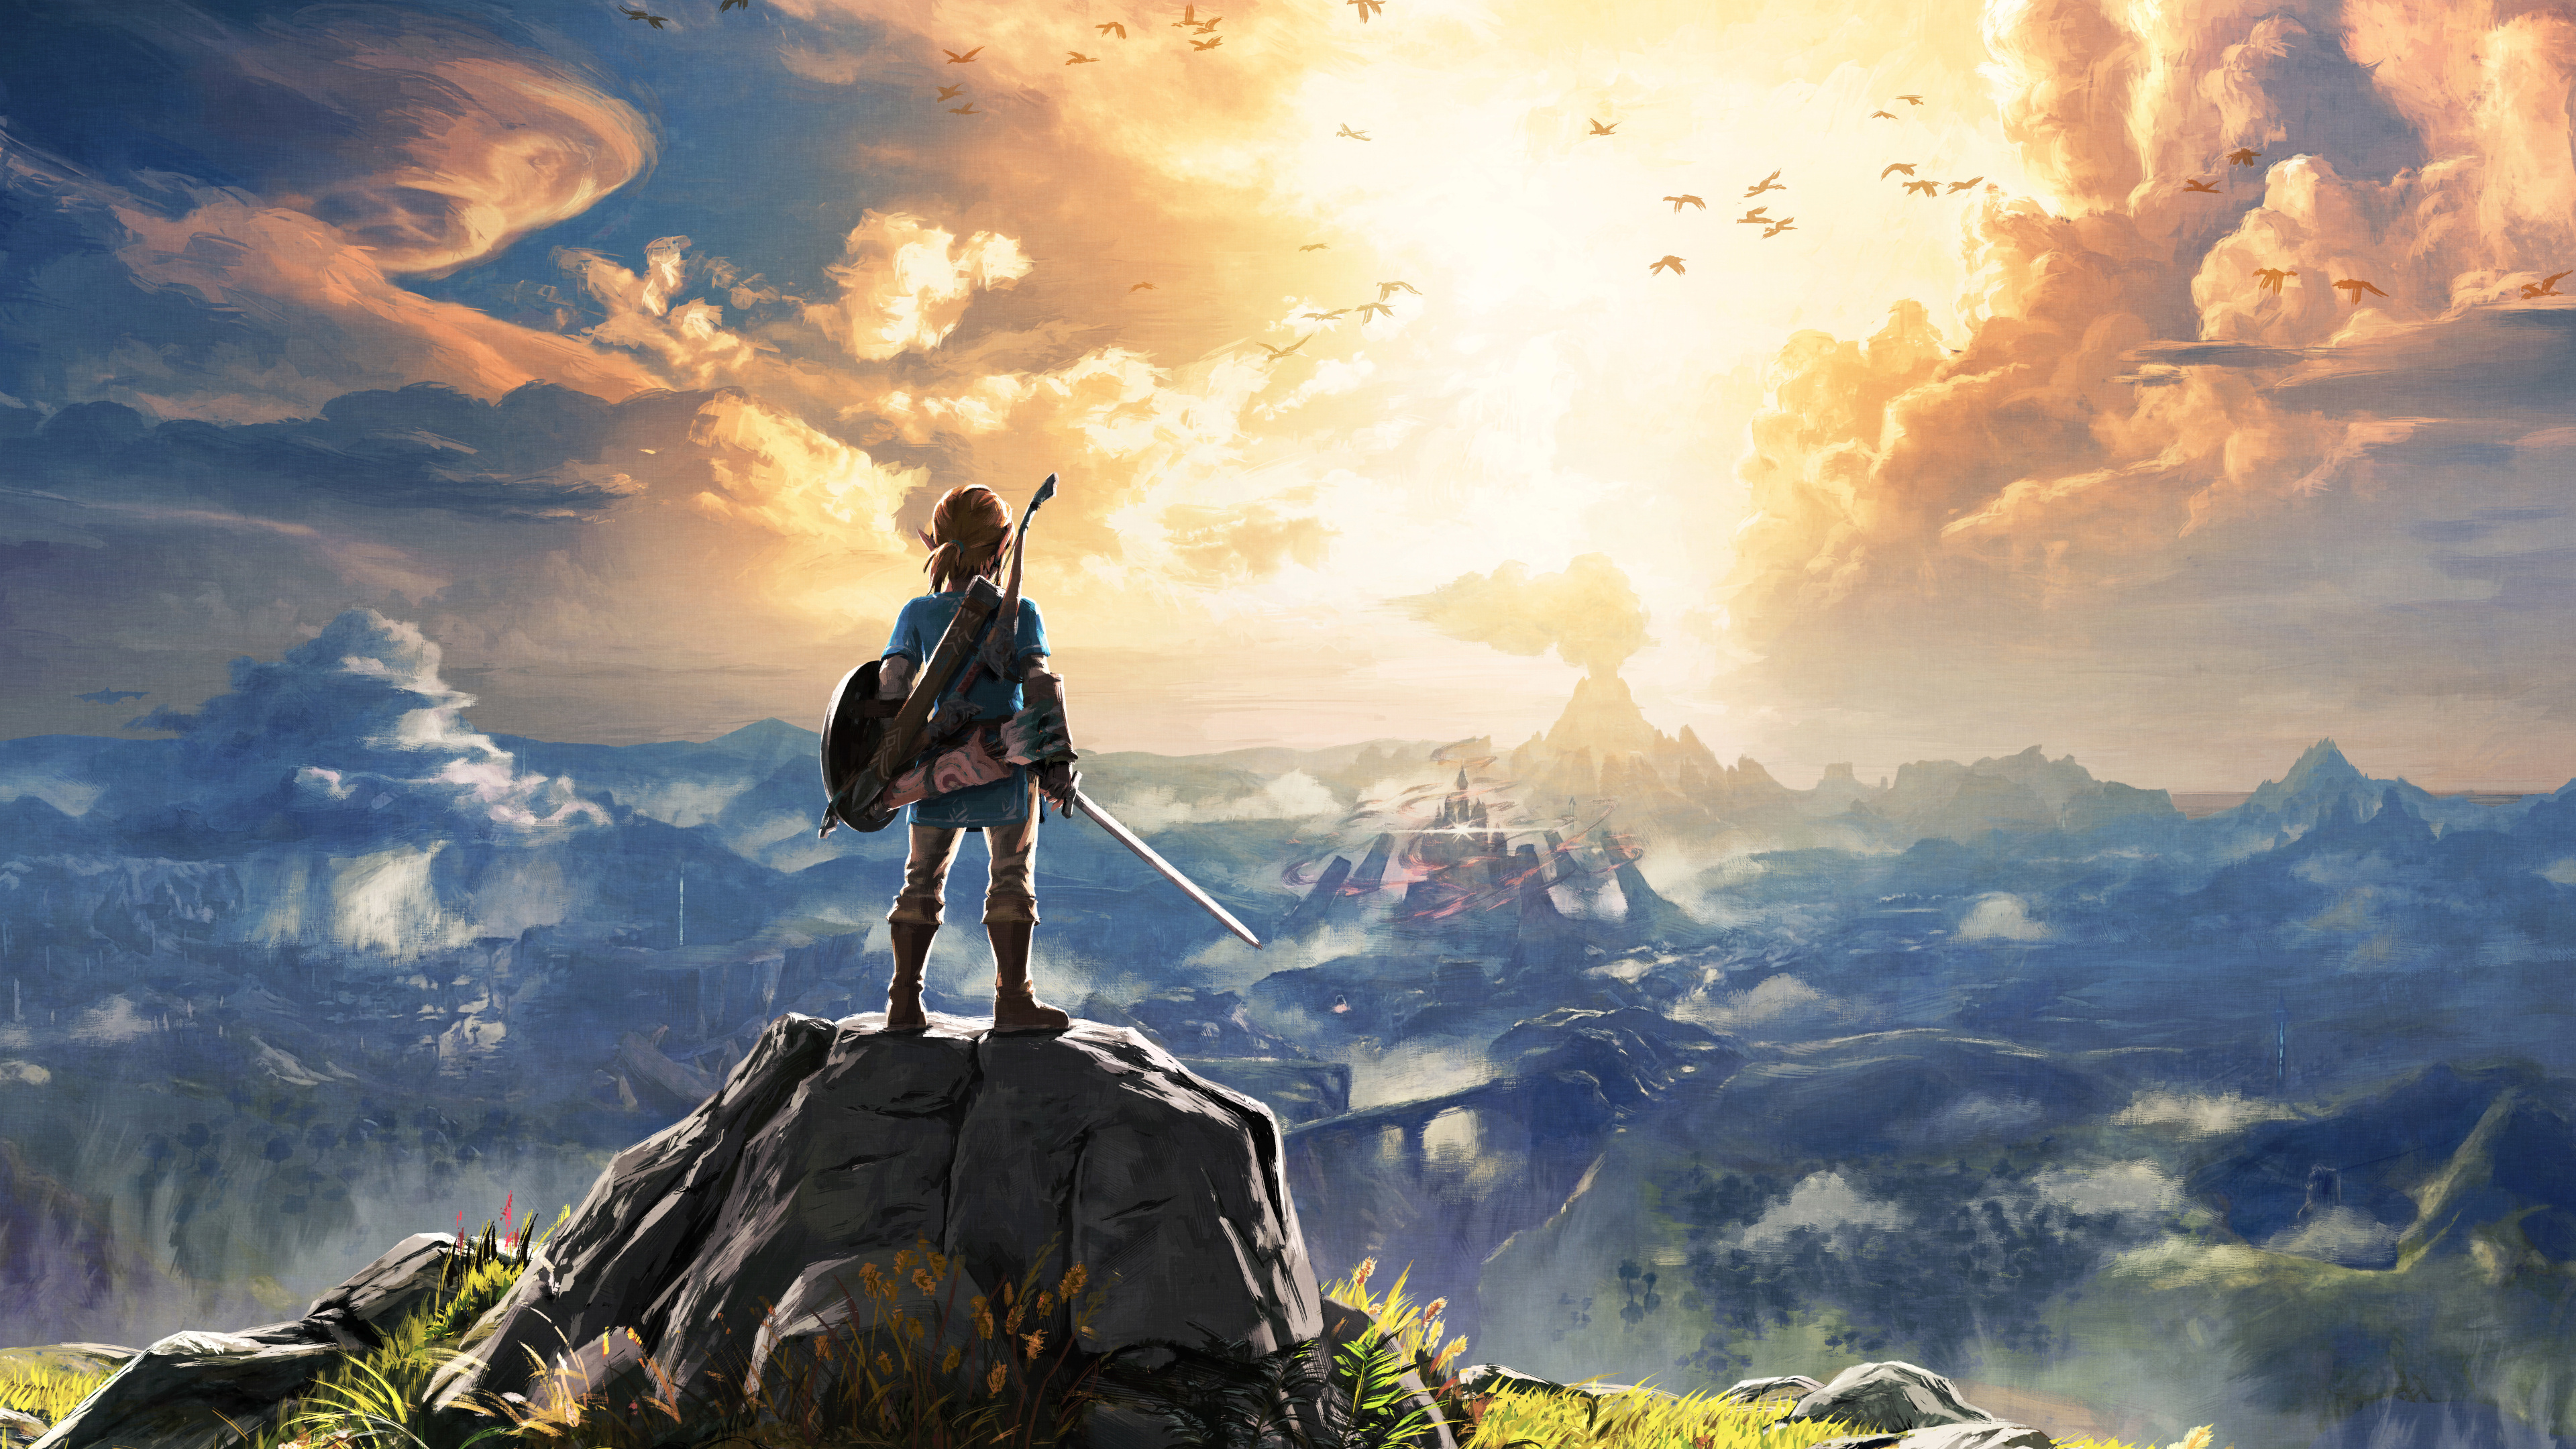 Release date, Breath of the Wild, Reviews and screenshots, 3840x2160 4K Desktop